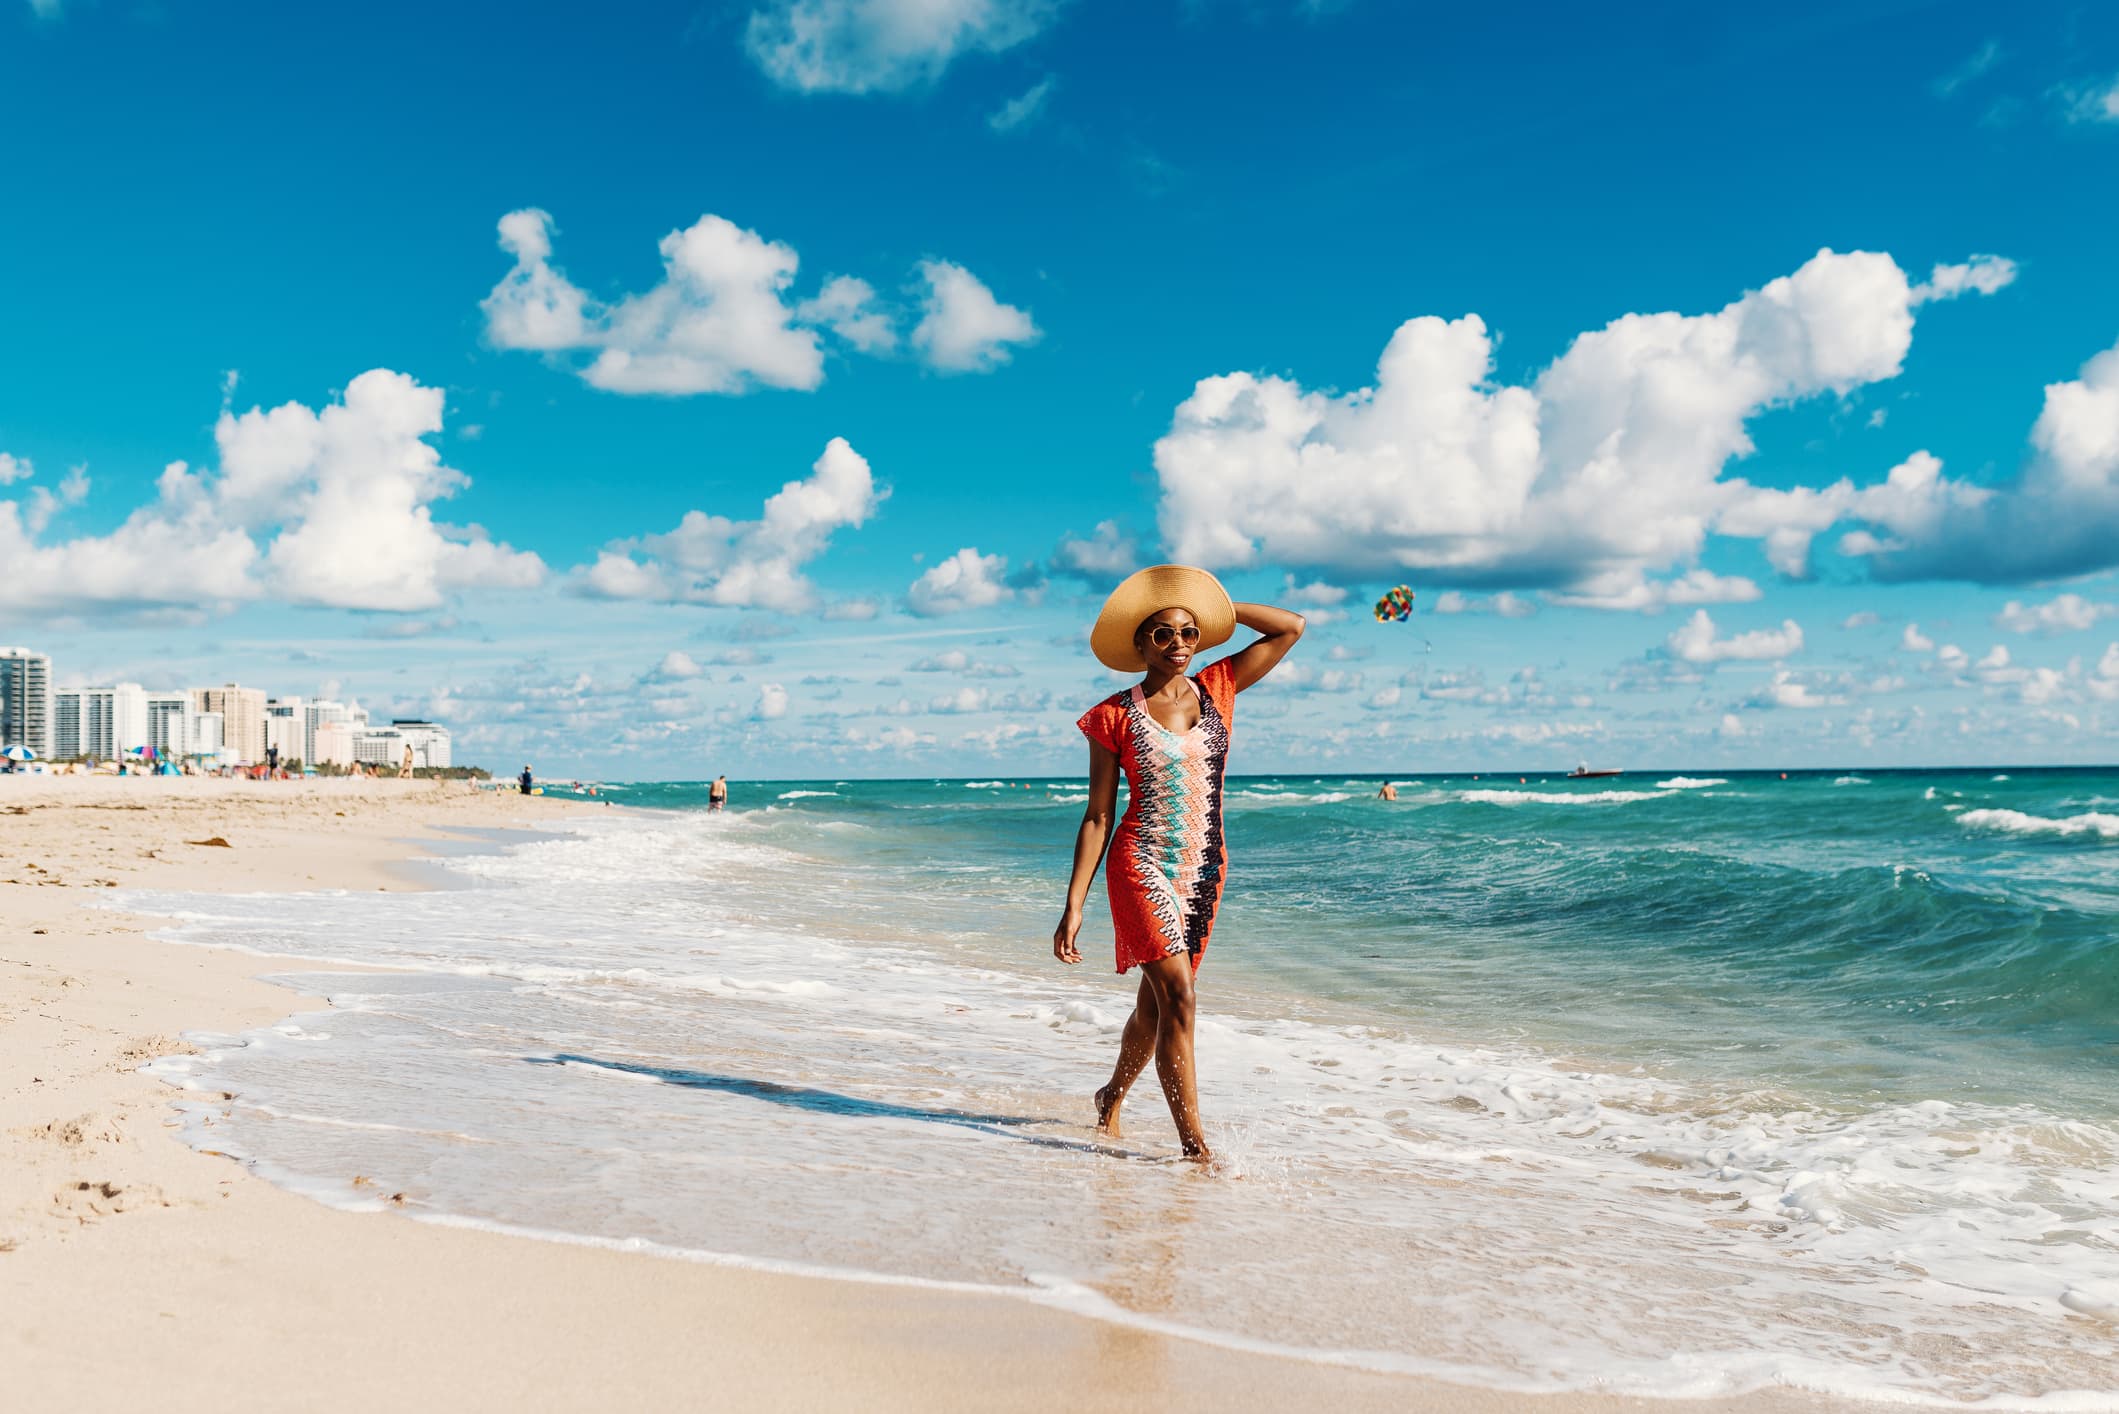 Top Beaches Vacation Wish List for Americans